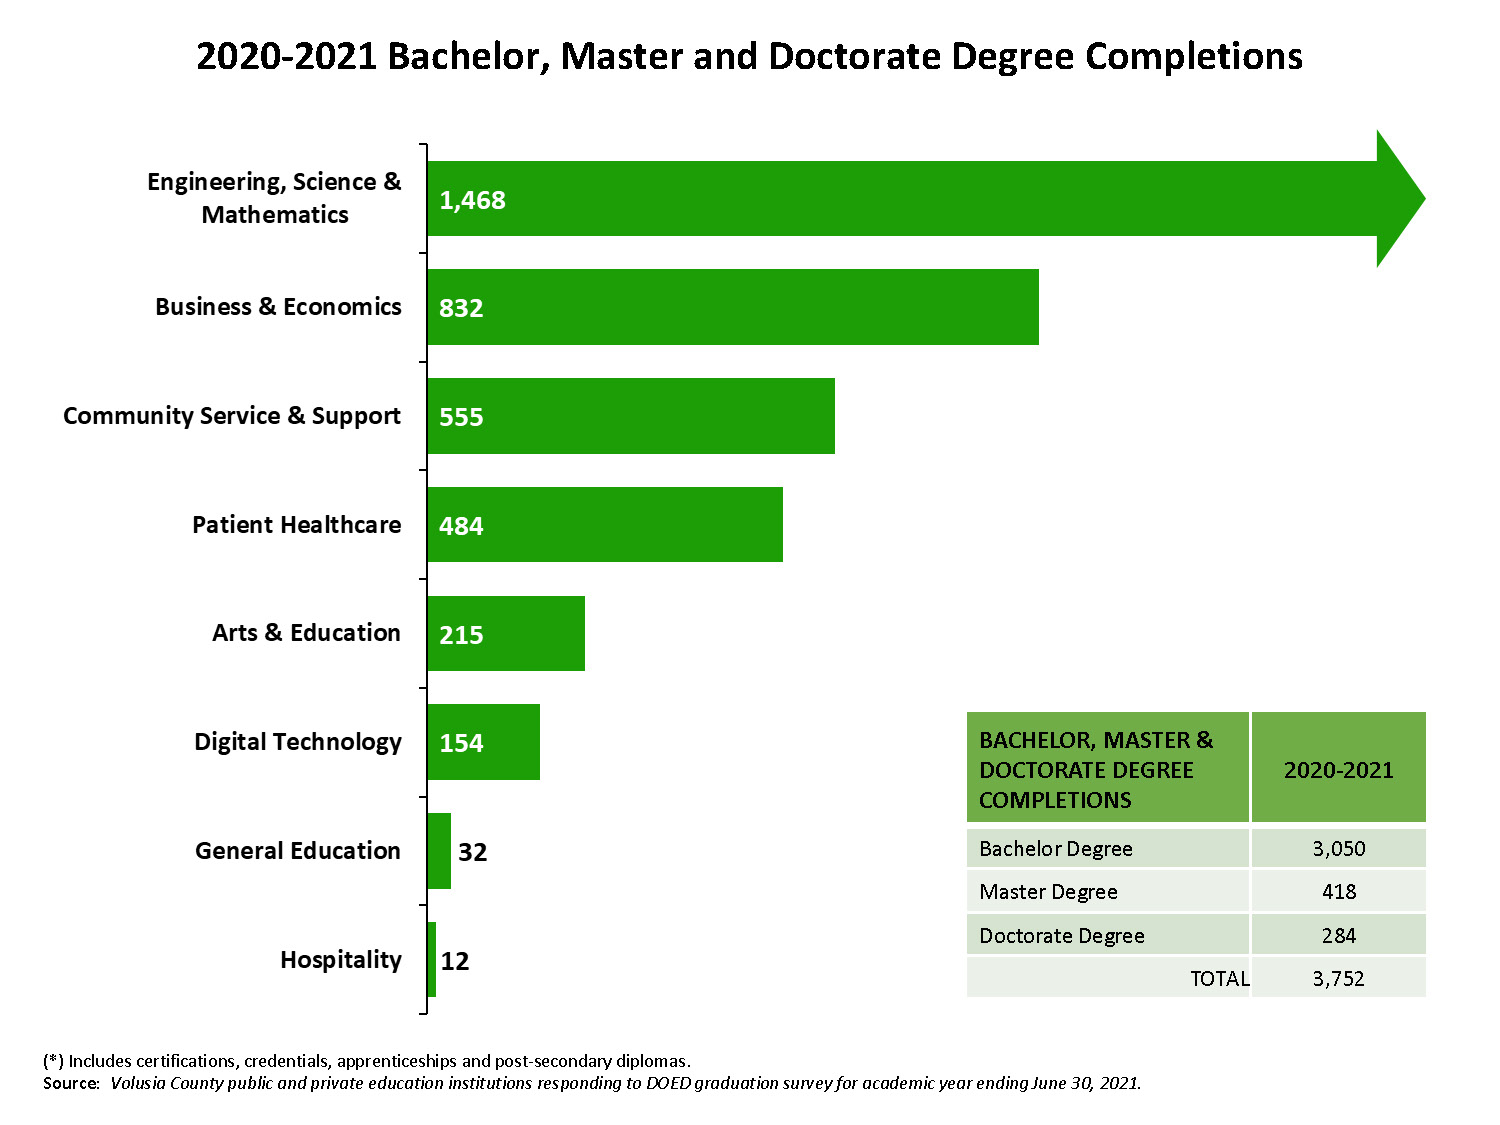 Bachelor, Master and Doctorate Degree Completions